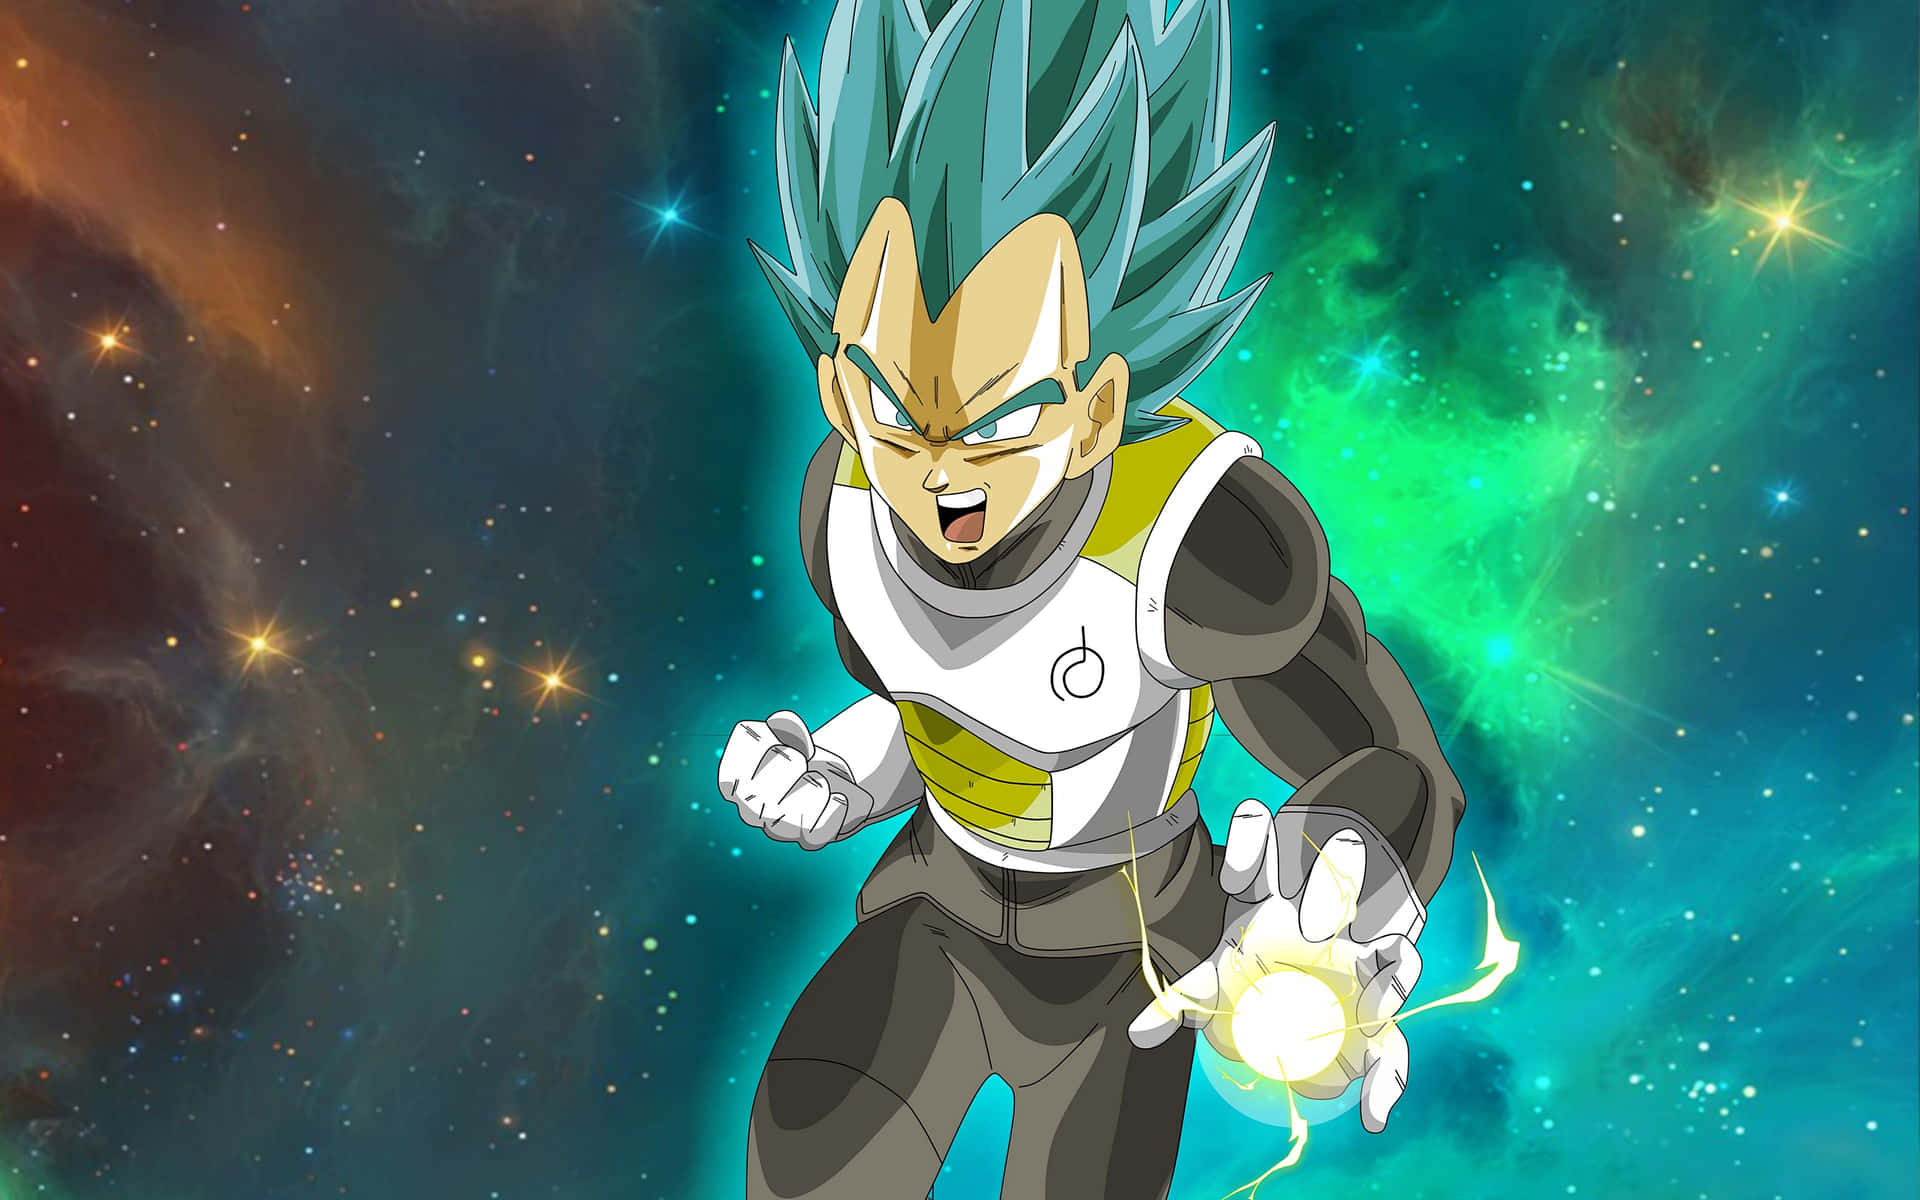 Majestic Vegeta in a Powerful Stance